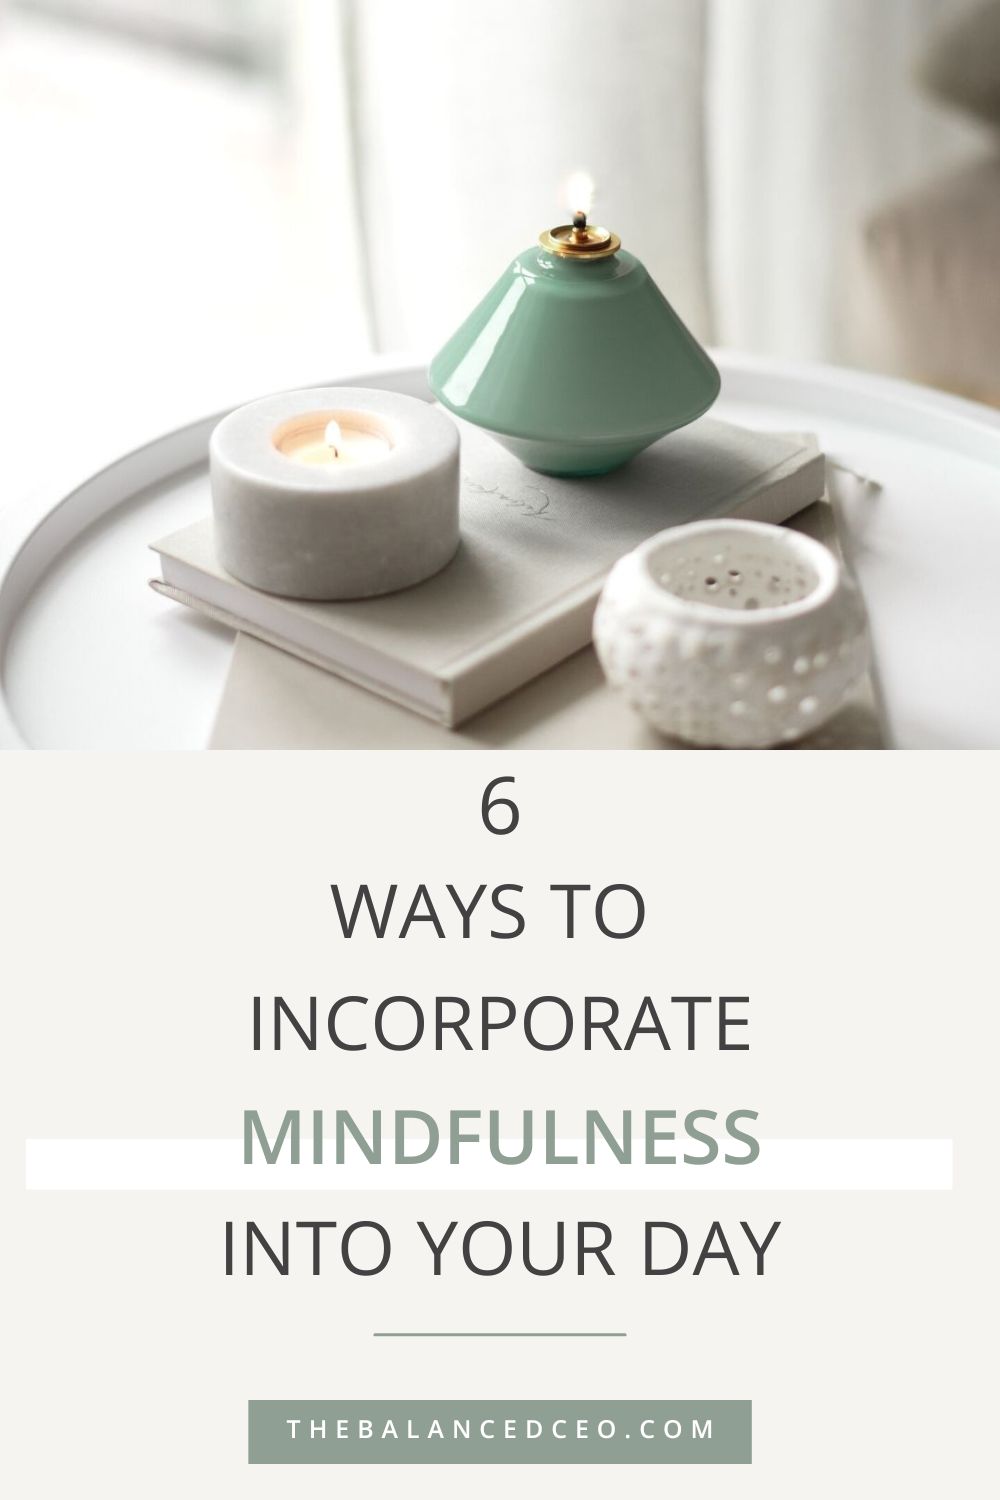 6 Ways to Incorporate Mindfulness into Your Day